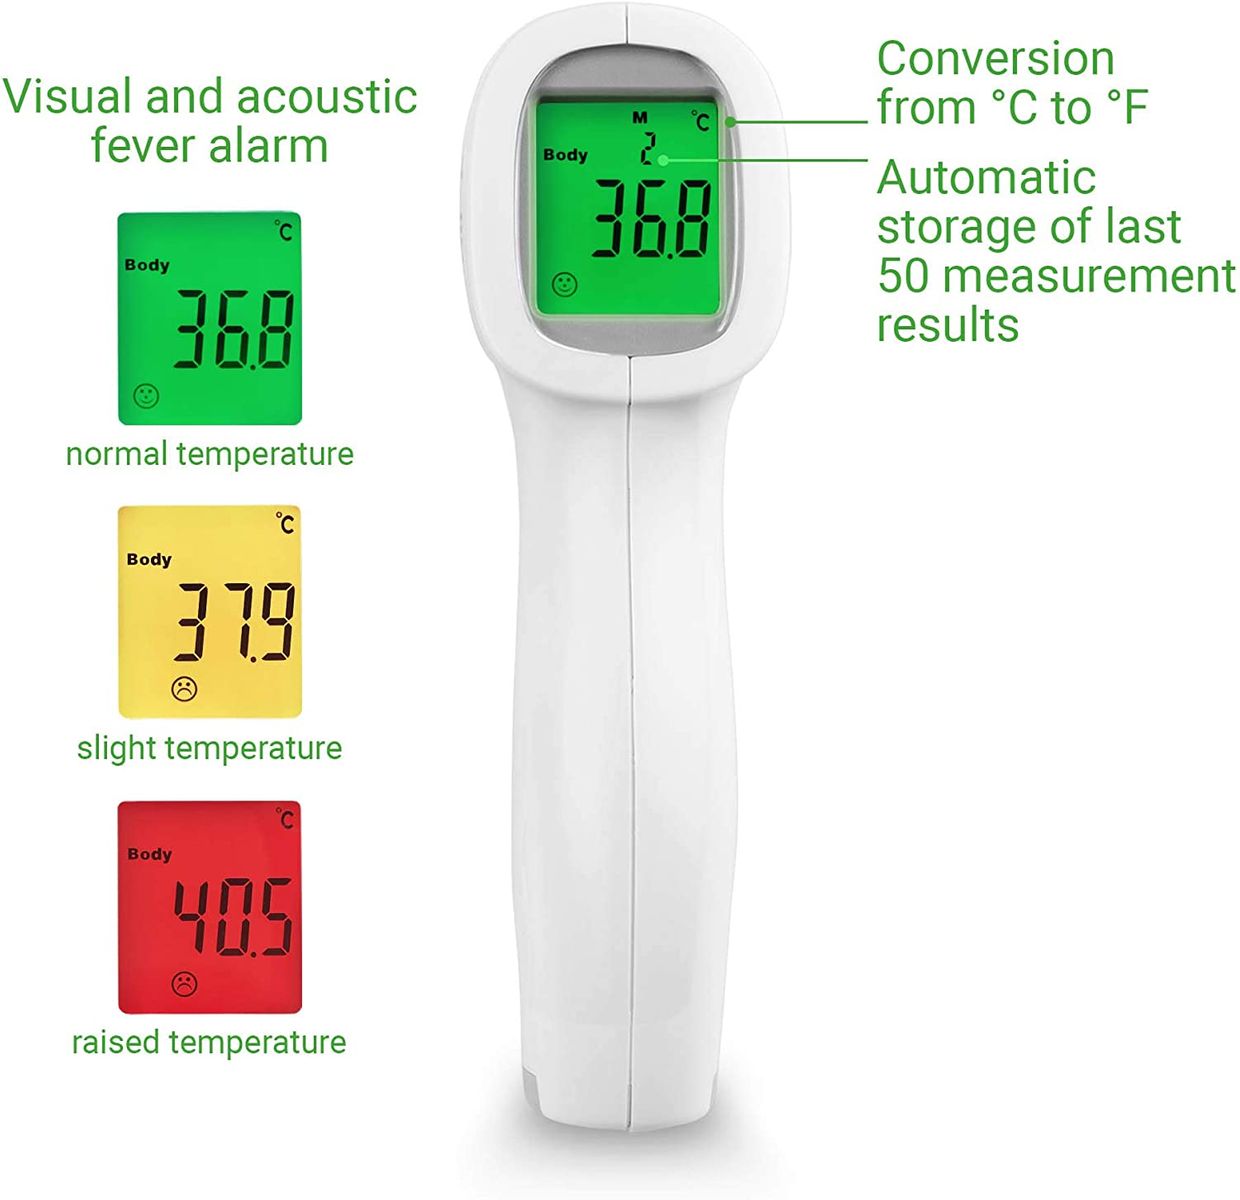 medisana TM A79 contactless infrared thermometer, clinical thermometer, non-contact forehead thermometer for adults, children and babies